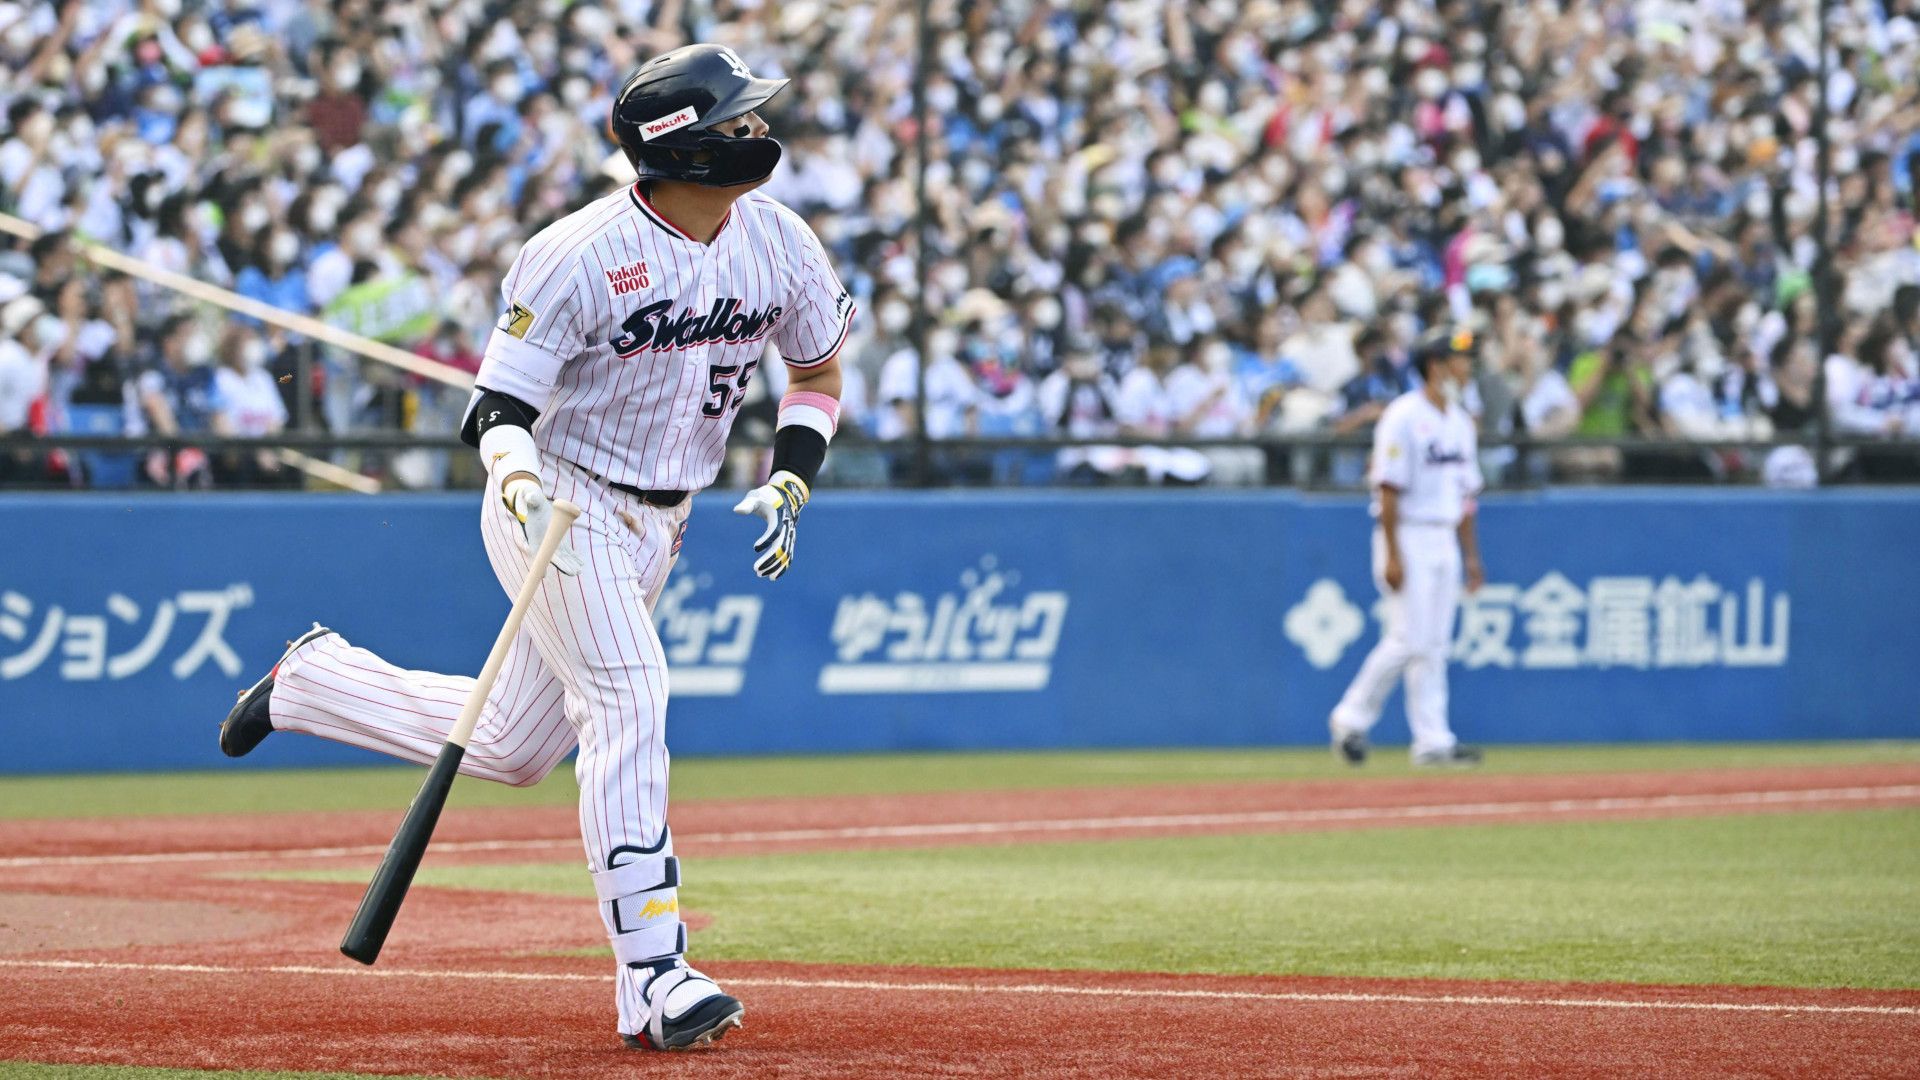 NPB Climax Series live stream how to watch every 2022 baseball game